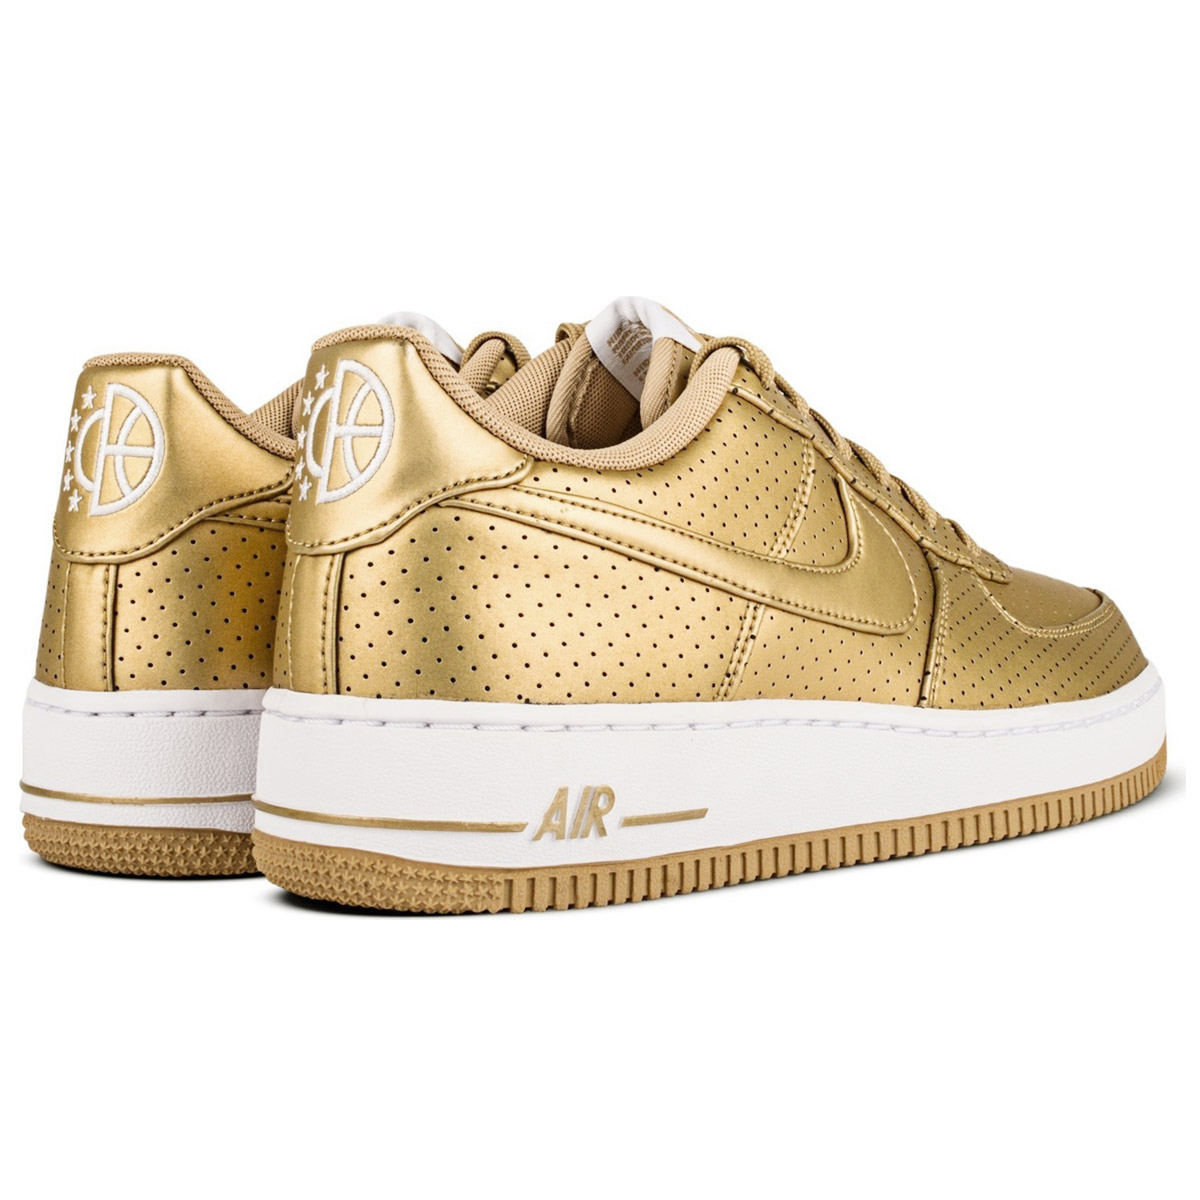 Nike Women Air Force 1 One LV8 GOLD EDITION Shoes Women's Sneakers gym